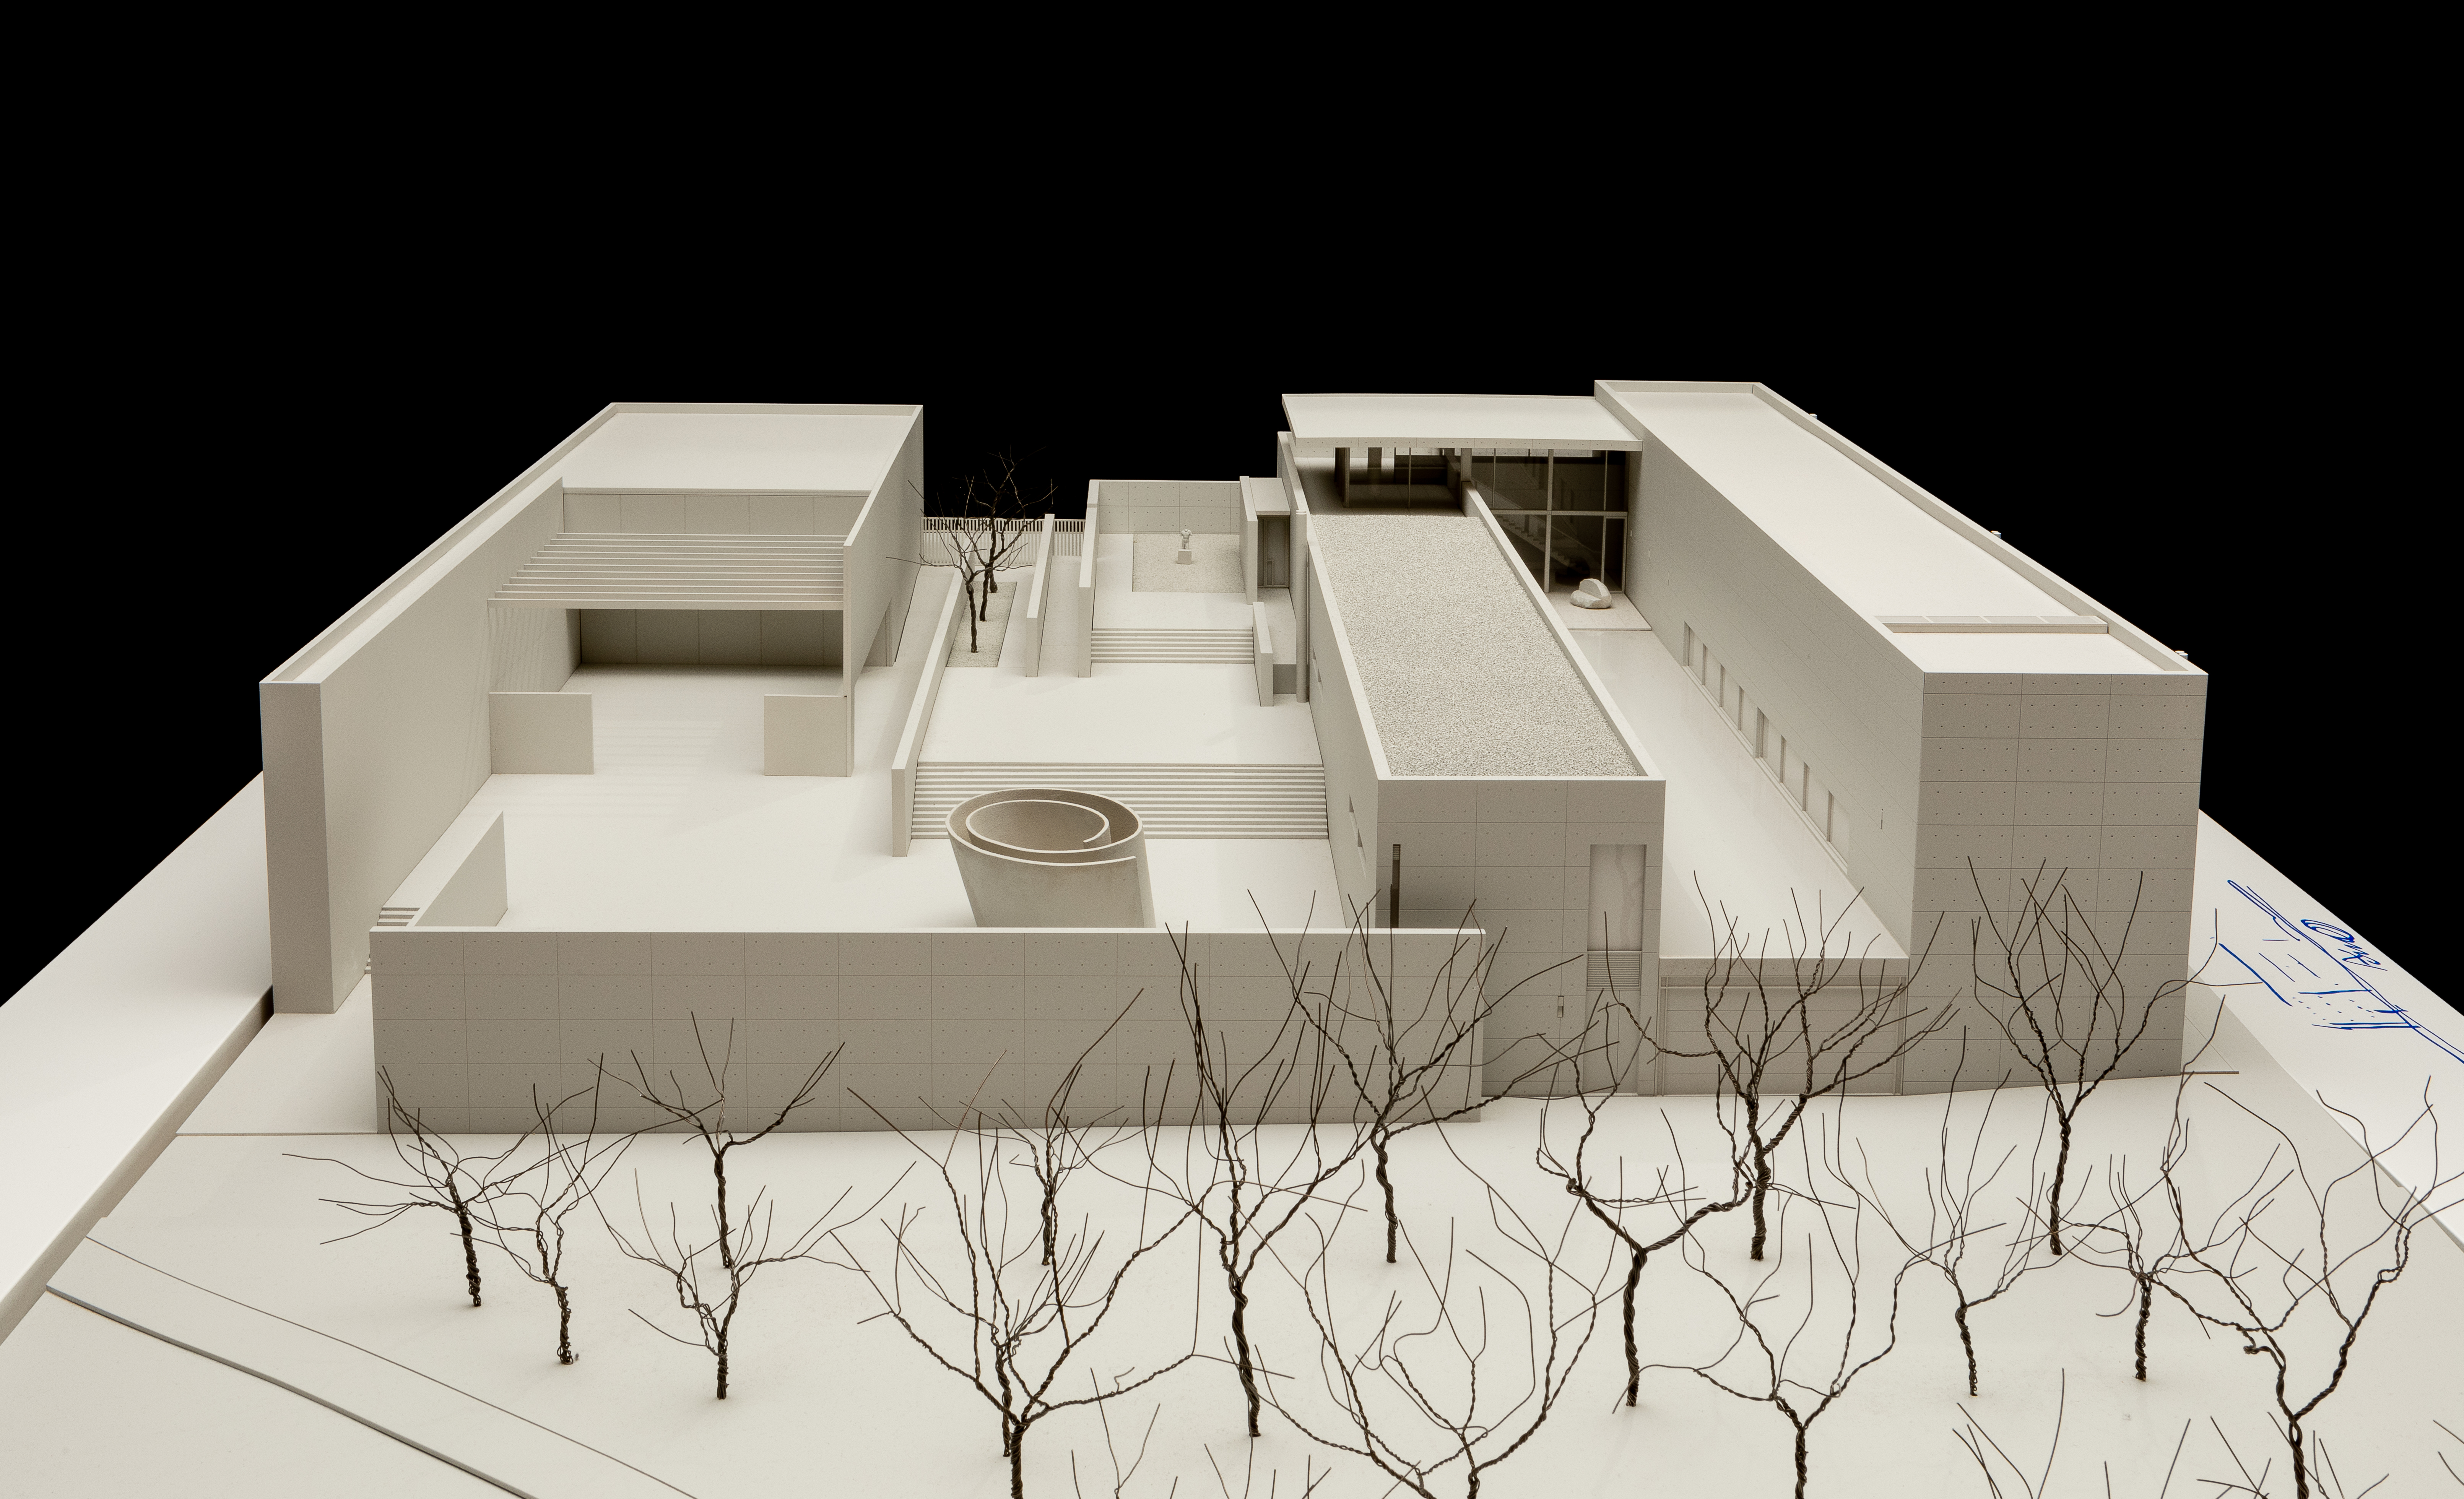 A structural, geometric white one-story model with long rectangular structures and leafless trees in the front courtyard.